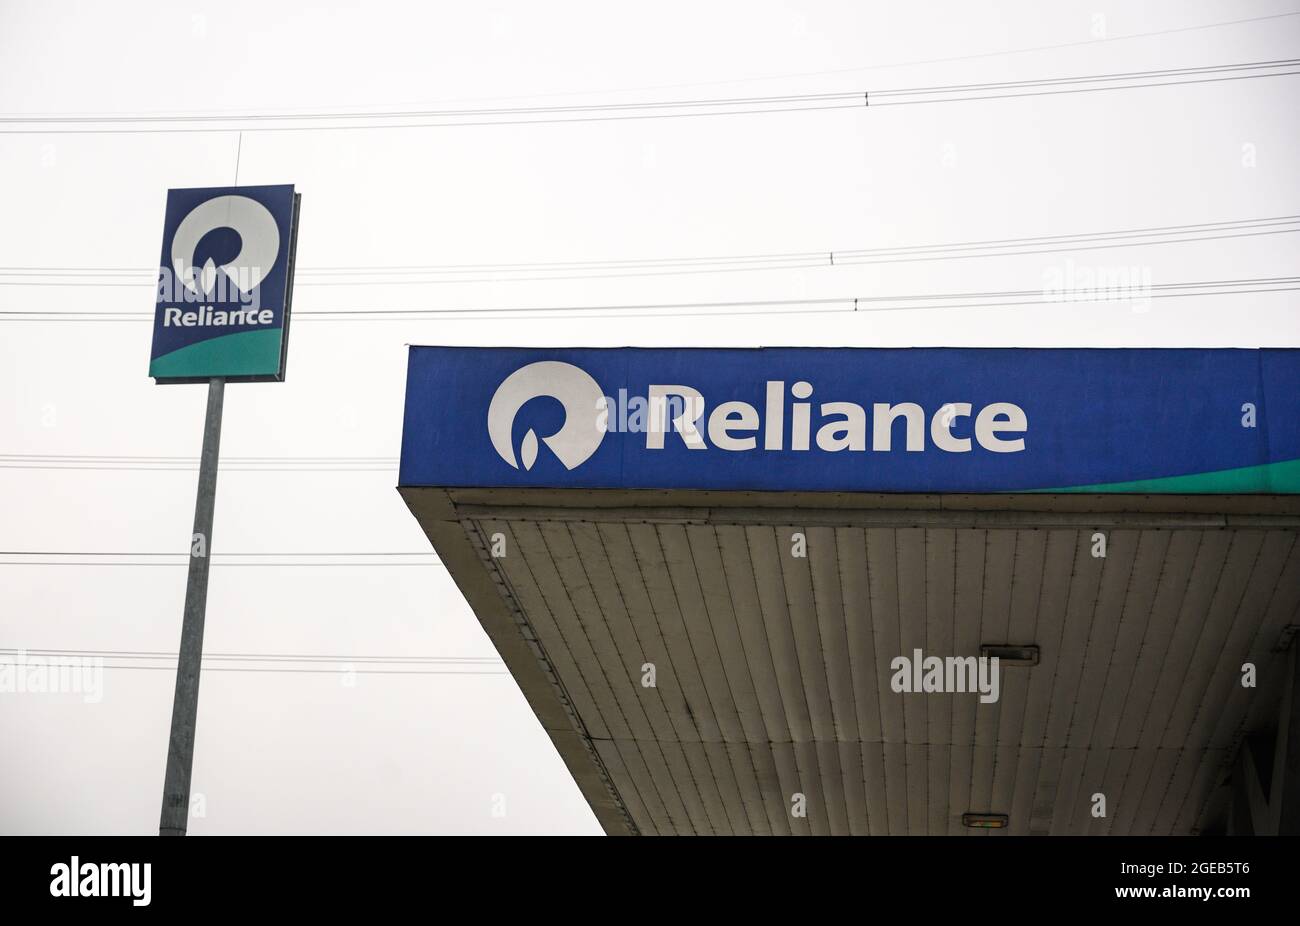 Reliance BP Mobility Ltd, the fuel marketing joint venture of India's largest and most profitable private sector company Reliance Industries Ltd (RIL) and UK's energy major BP Plc, is planning to open retail outlets including convenience stores and food joints at a number of its fuel stations, mainly along the highways. Birohi, West Bengal; India. Stock Photo